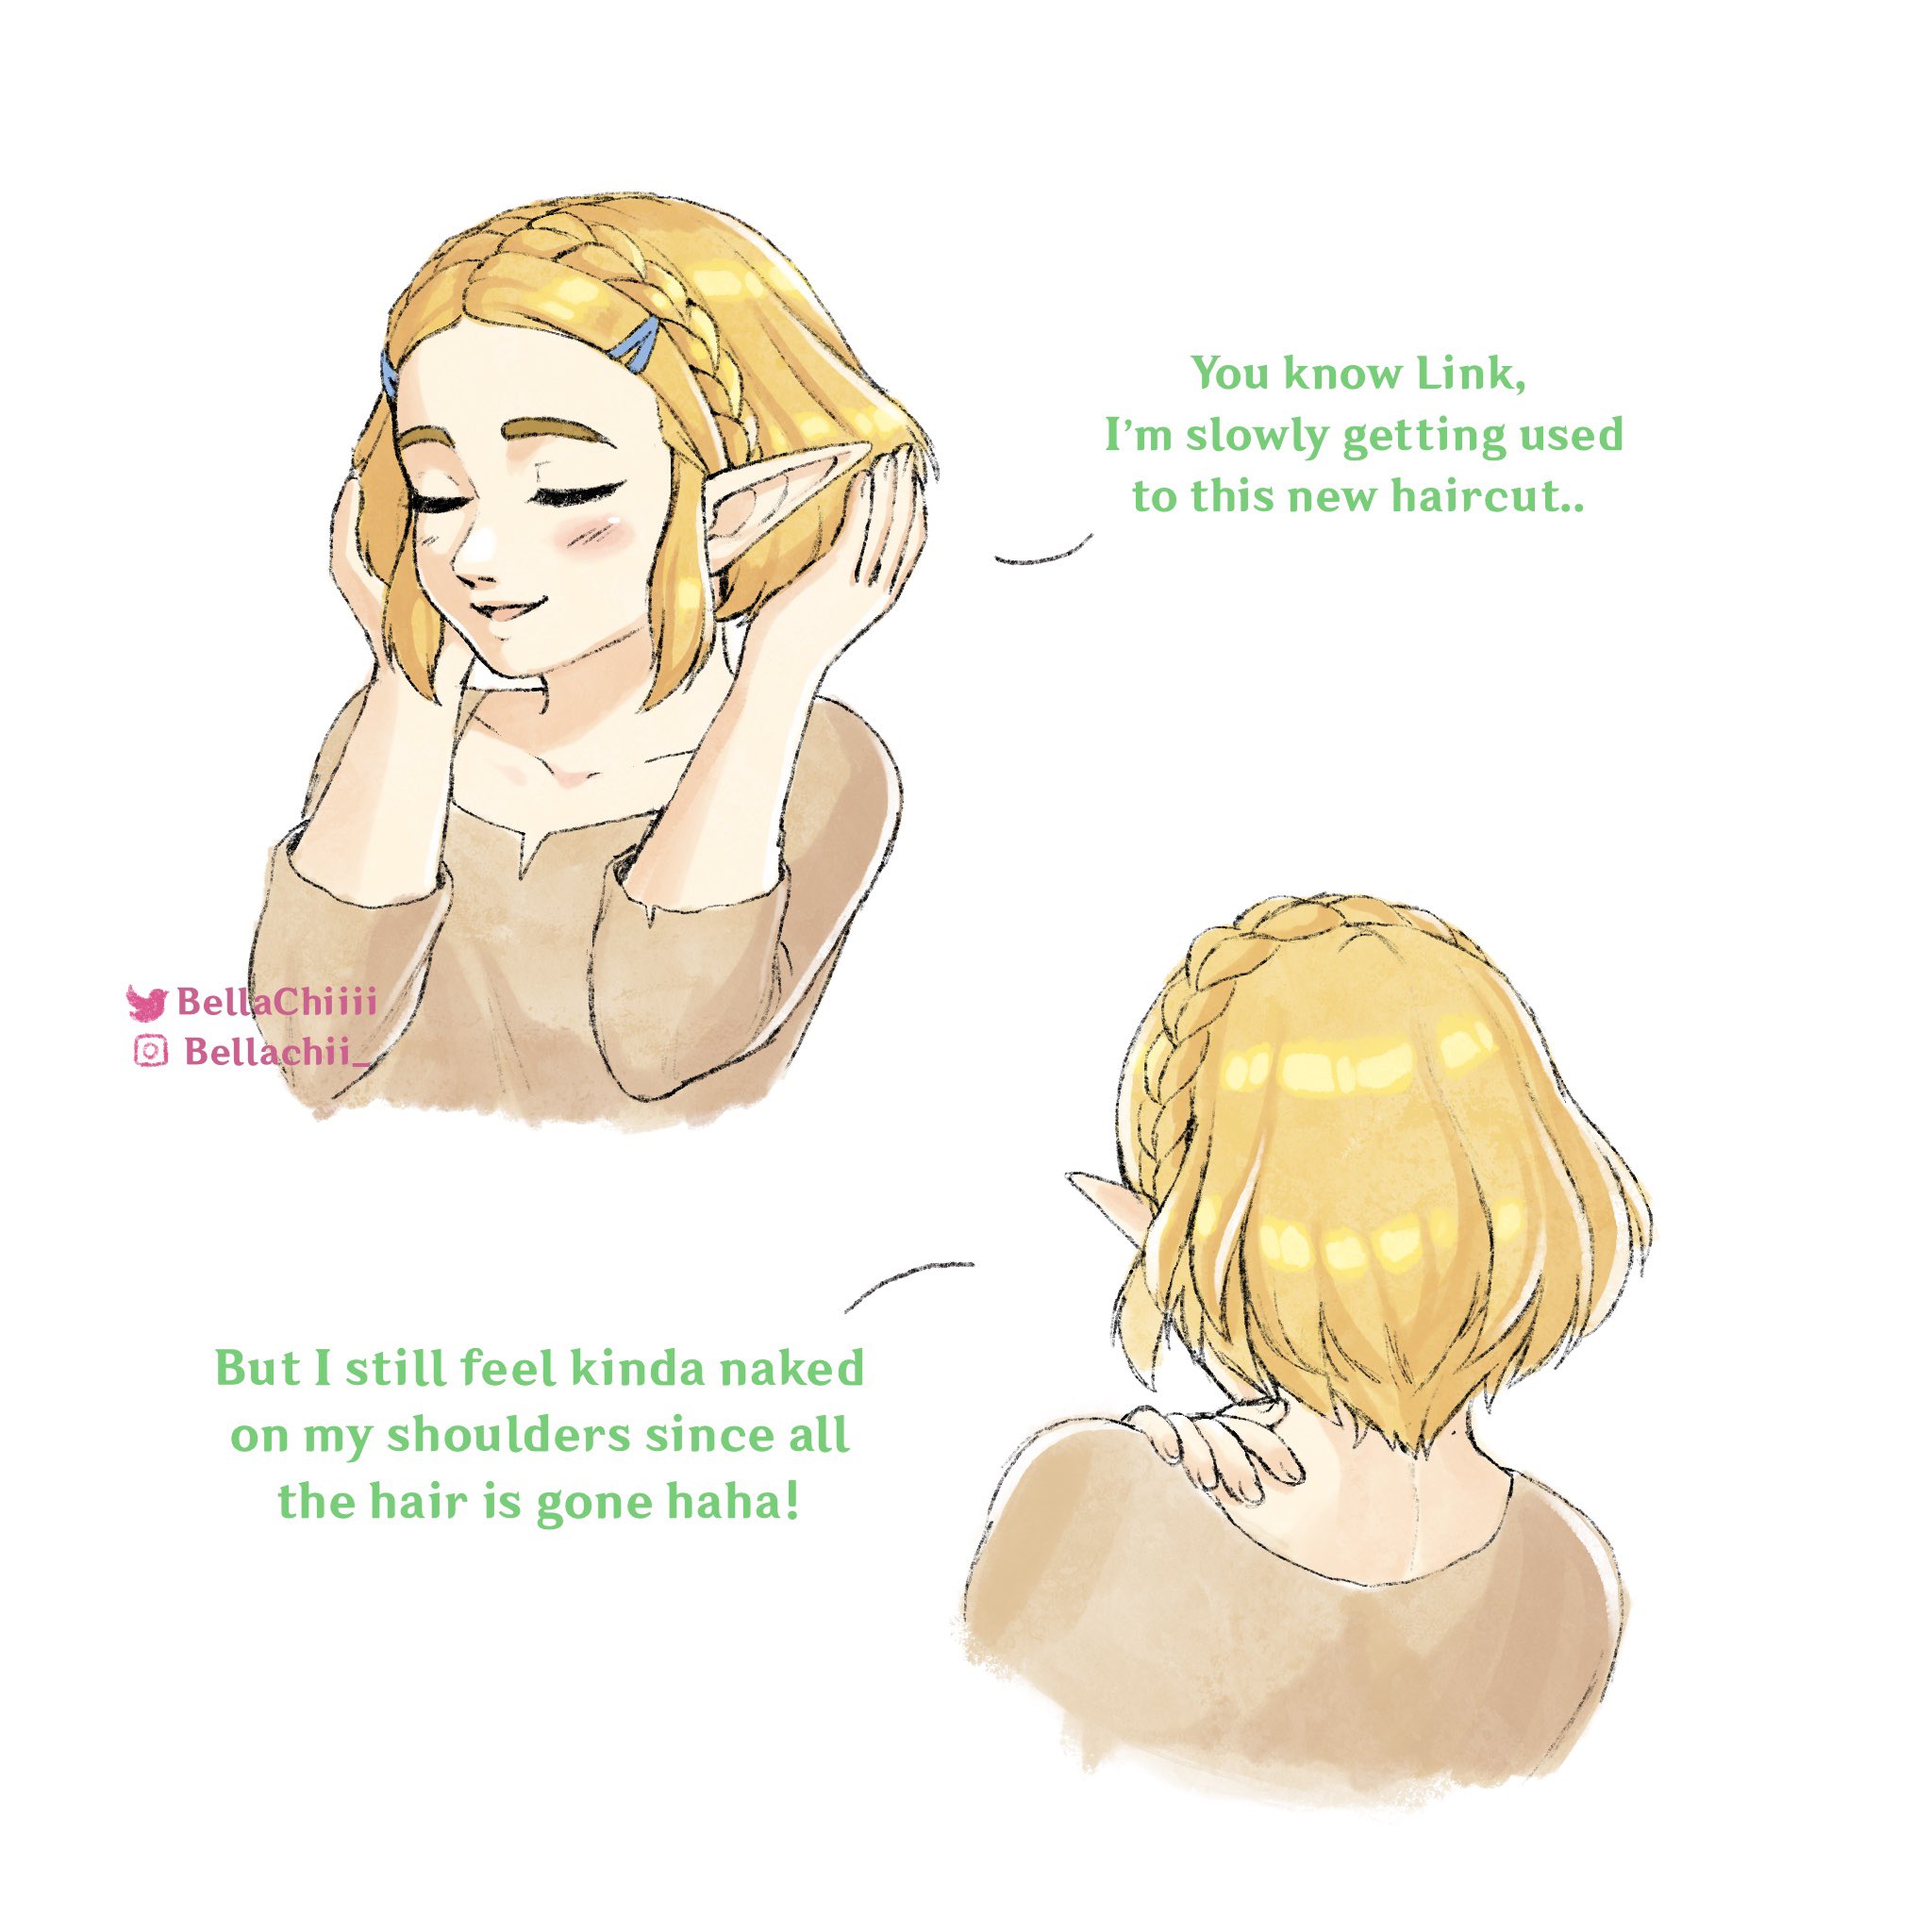 Zelink I think @/VioletMadness7 on Twitter is the original creator